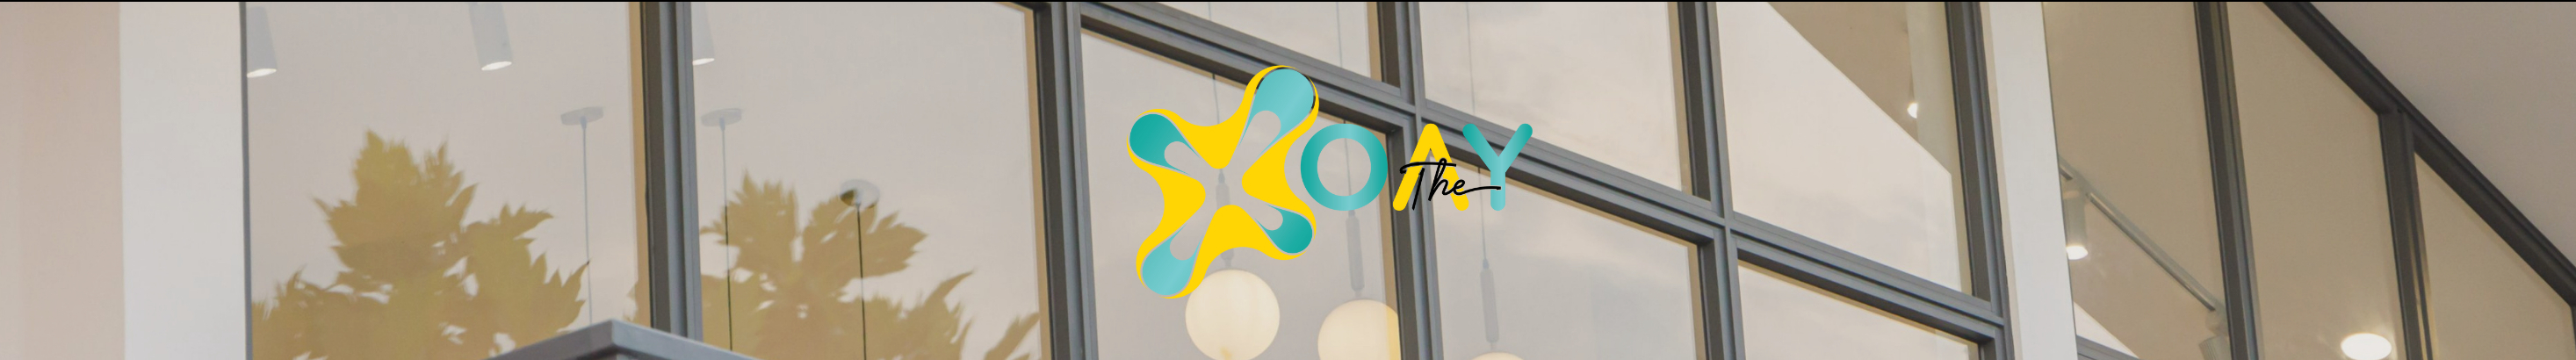 The XOAY Open Workspace's profile banner